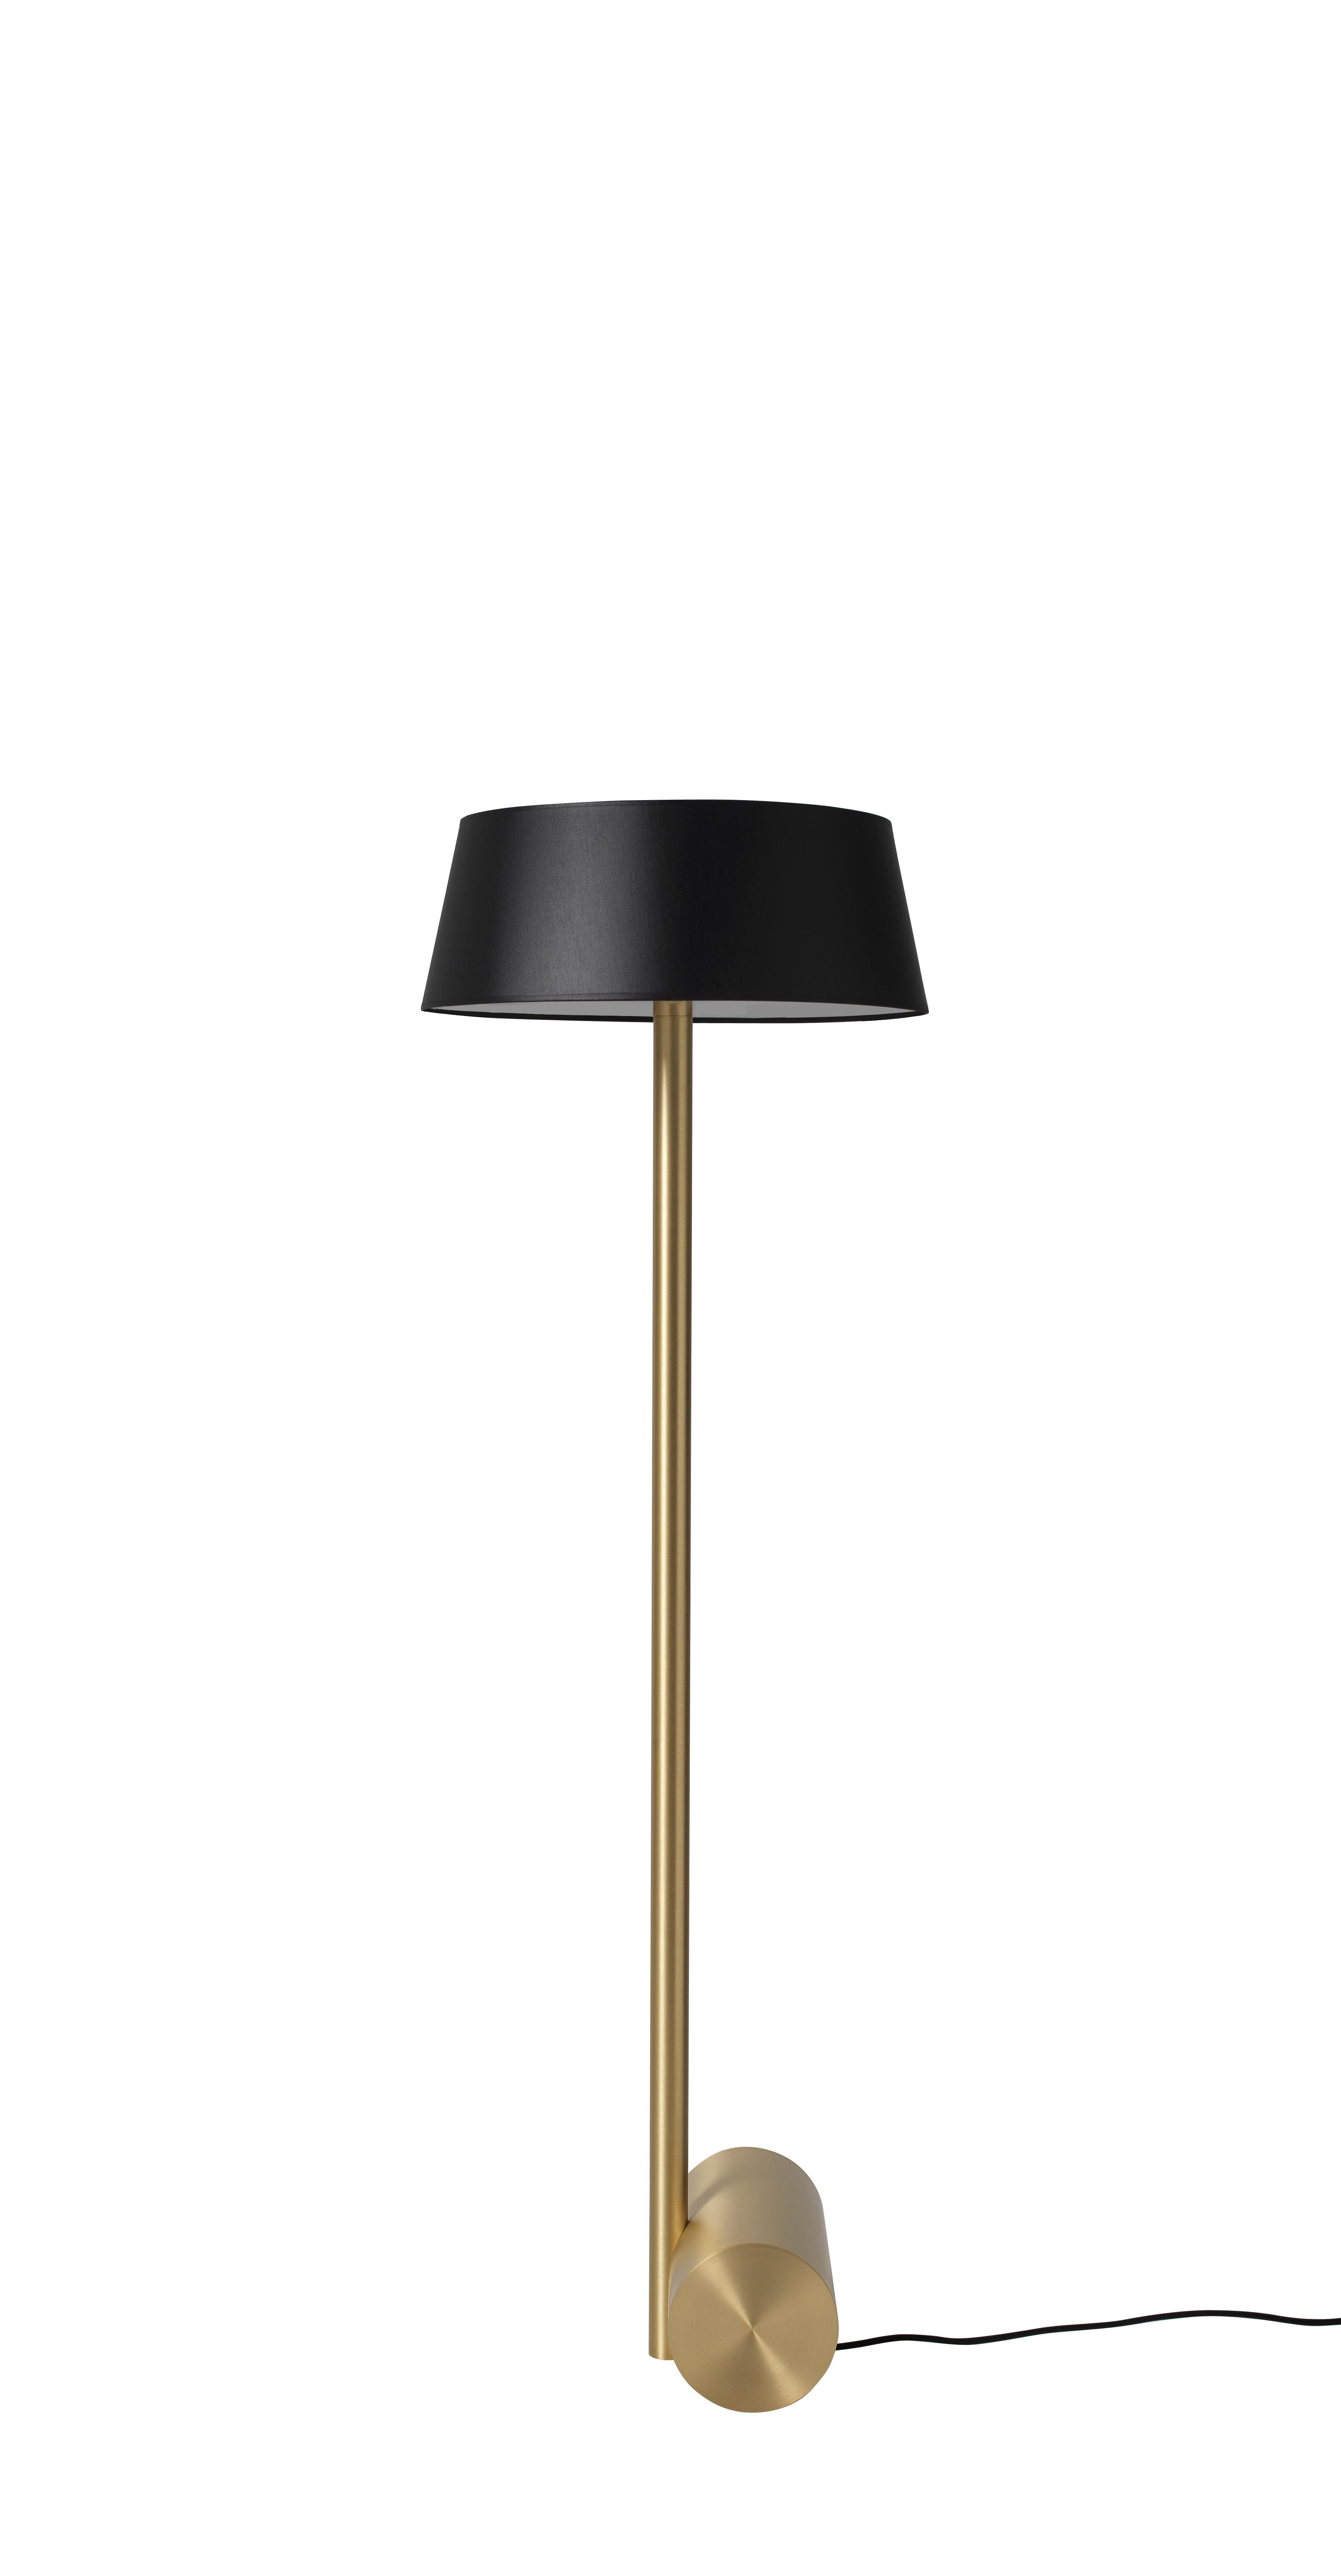 Calee XS floor lamp by Pool
Dimensions: D50 X H140 cm
Materials: solid brass, Polycarbonate, textile cable (2m).
Others finishes and dimensions are available.

All our lamps can be wired according to each country. If sold to the USA it will be